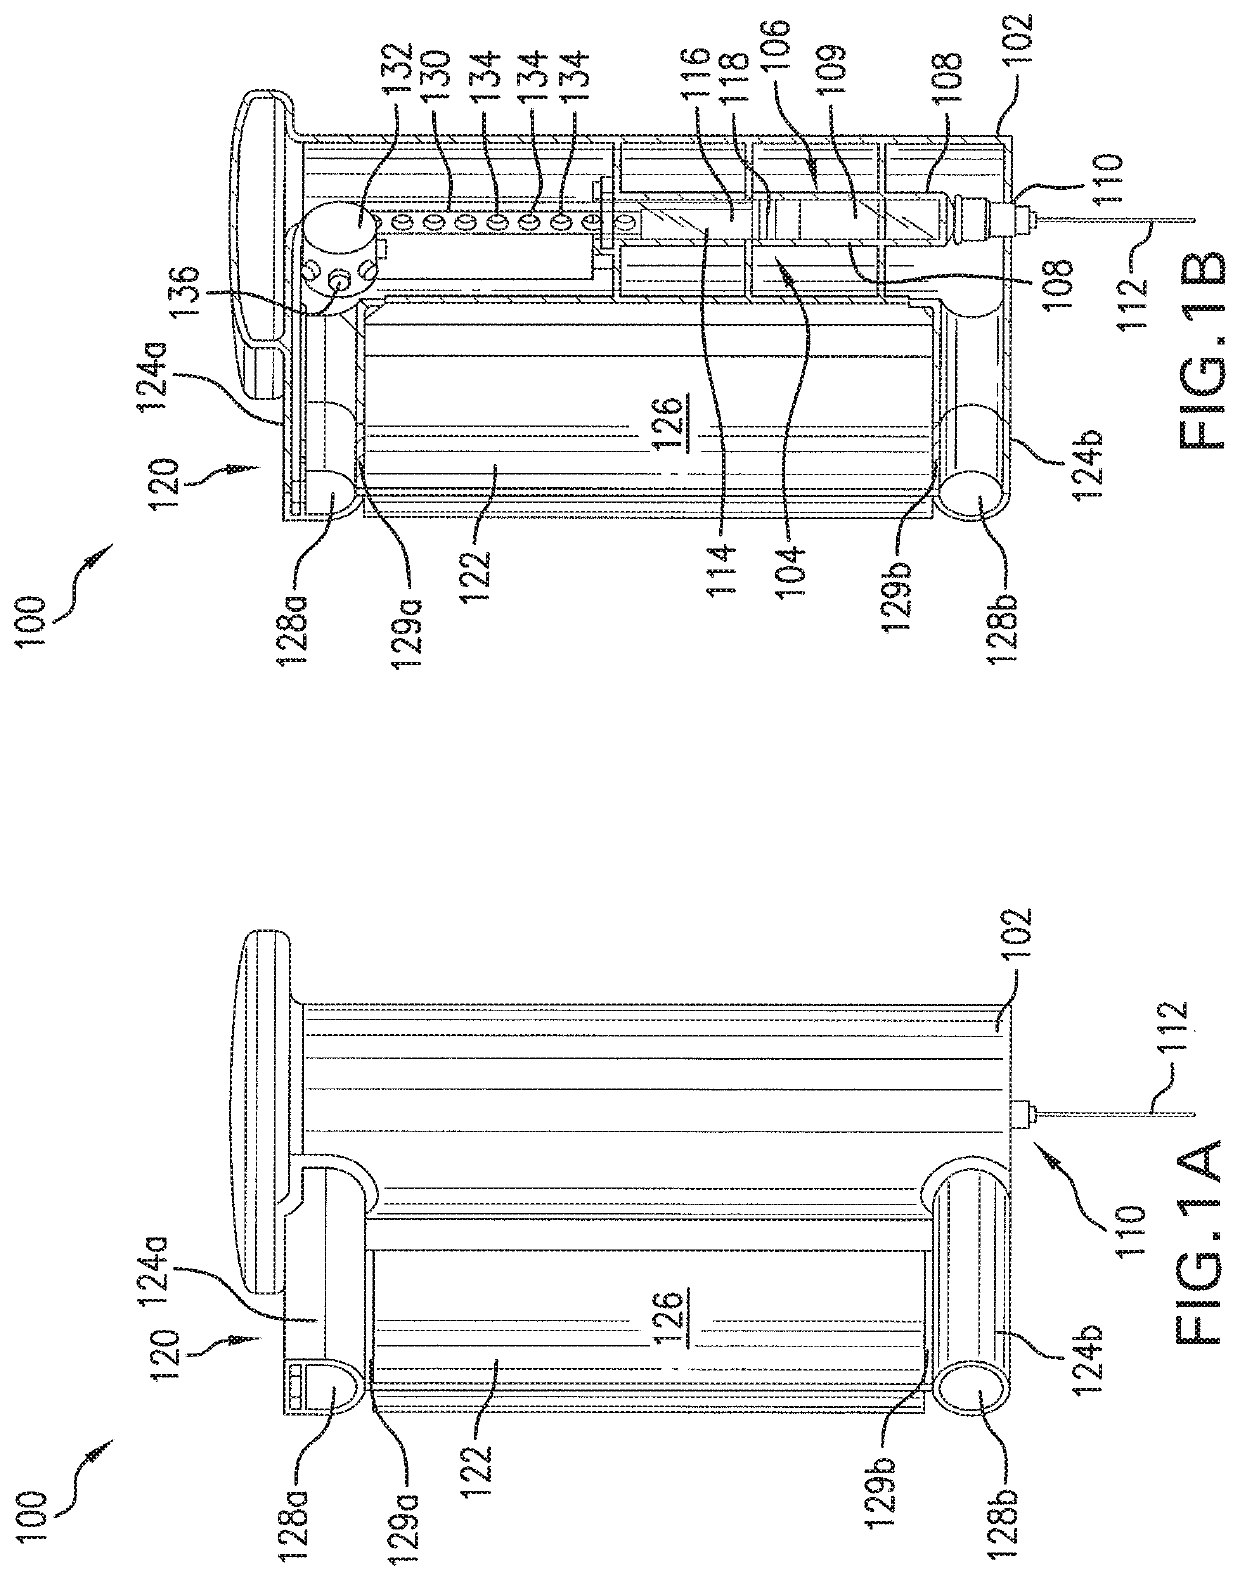 Manually-actuated injection device for high-viscosity drugs